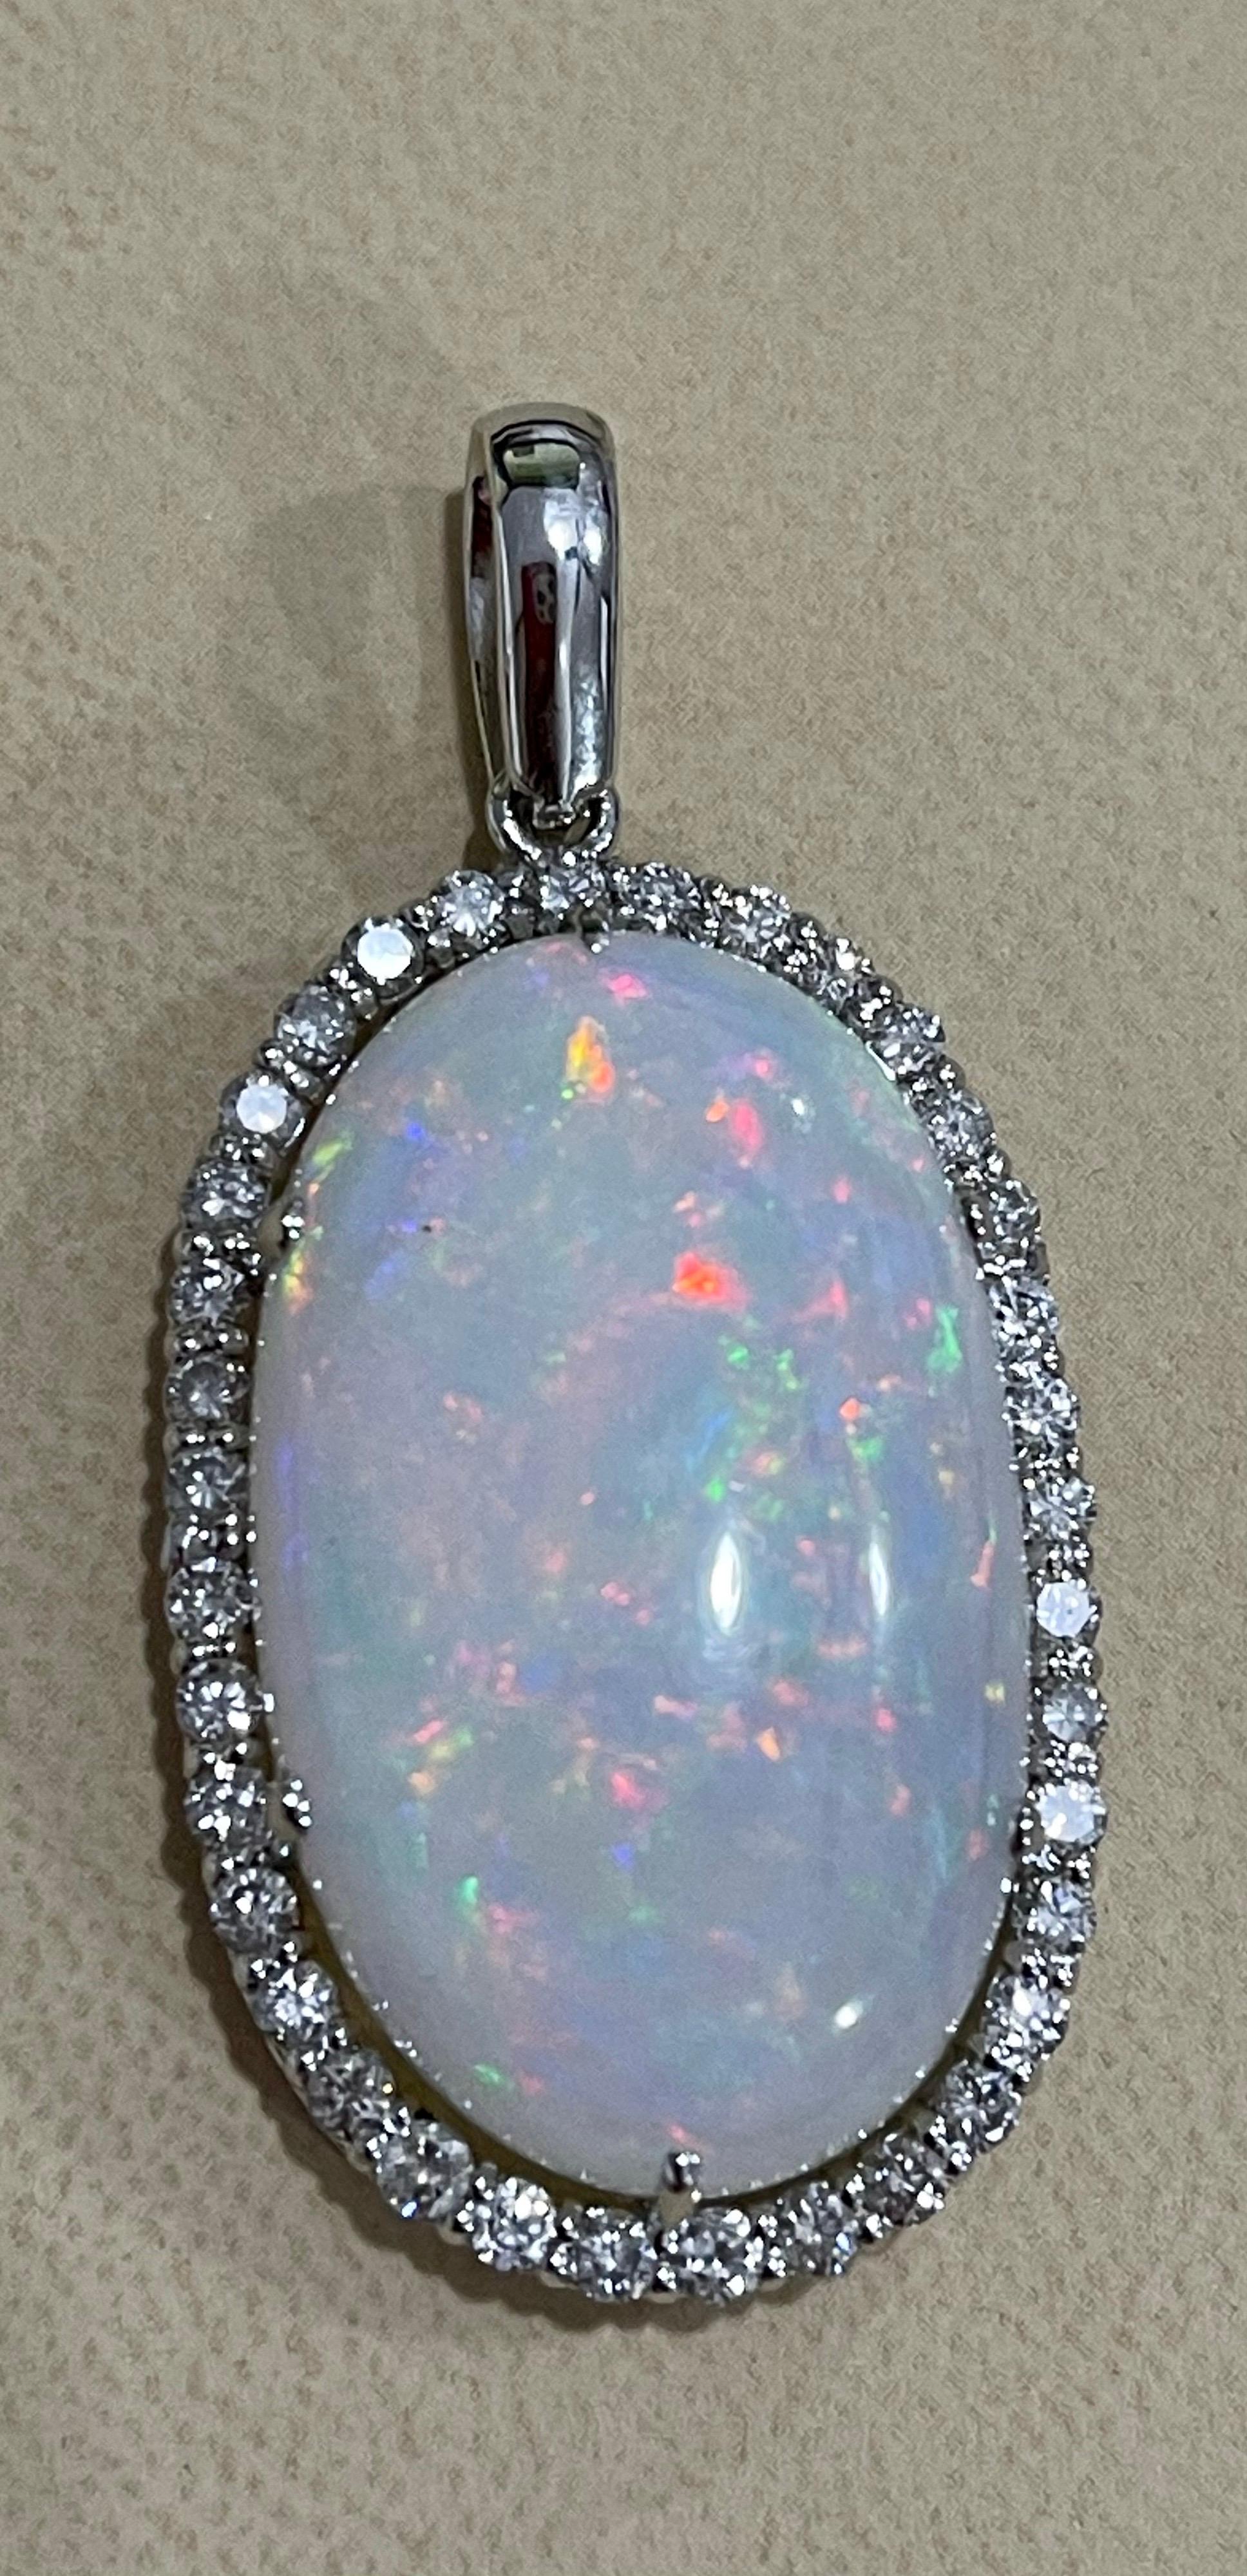 Approximately 29 Carat Oval Ethiopian Opal & Approximately  2.5 Ct  Diamond Pendant/Necklace 14K White Gold 
This spectacular Pendant Necklace consisting of a single long Oval Shape Ethiopian Opal Approximately 29 Carat. The Opal is surrounded by